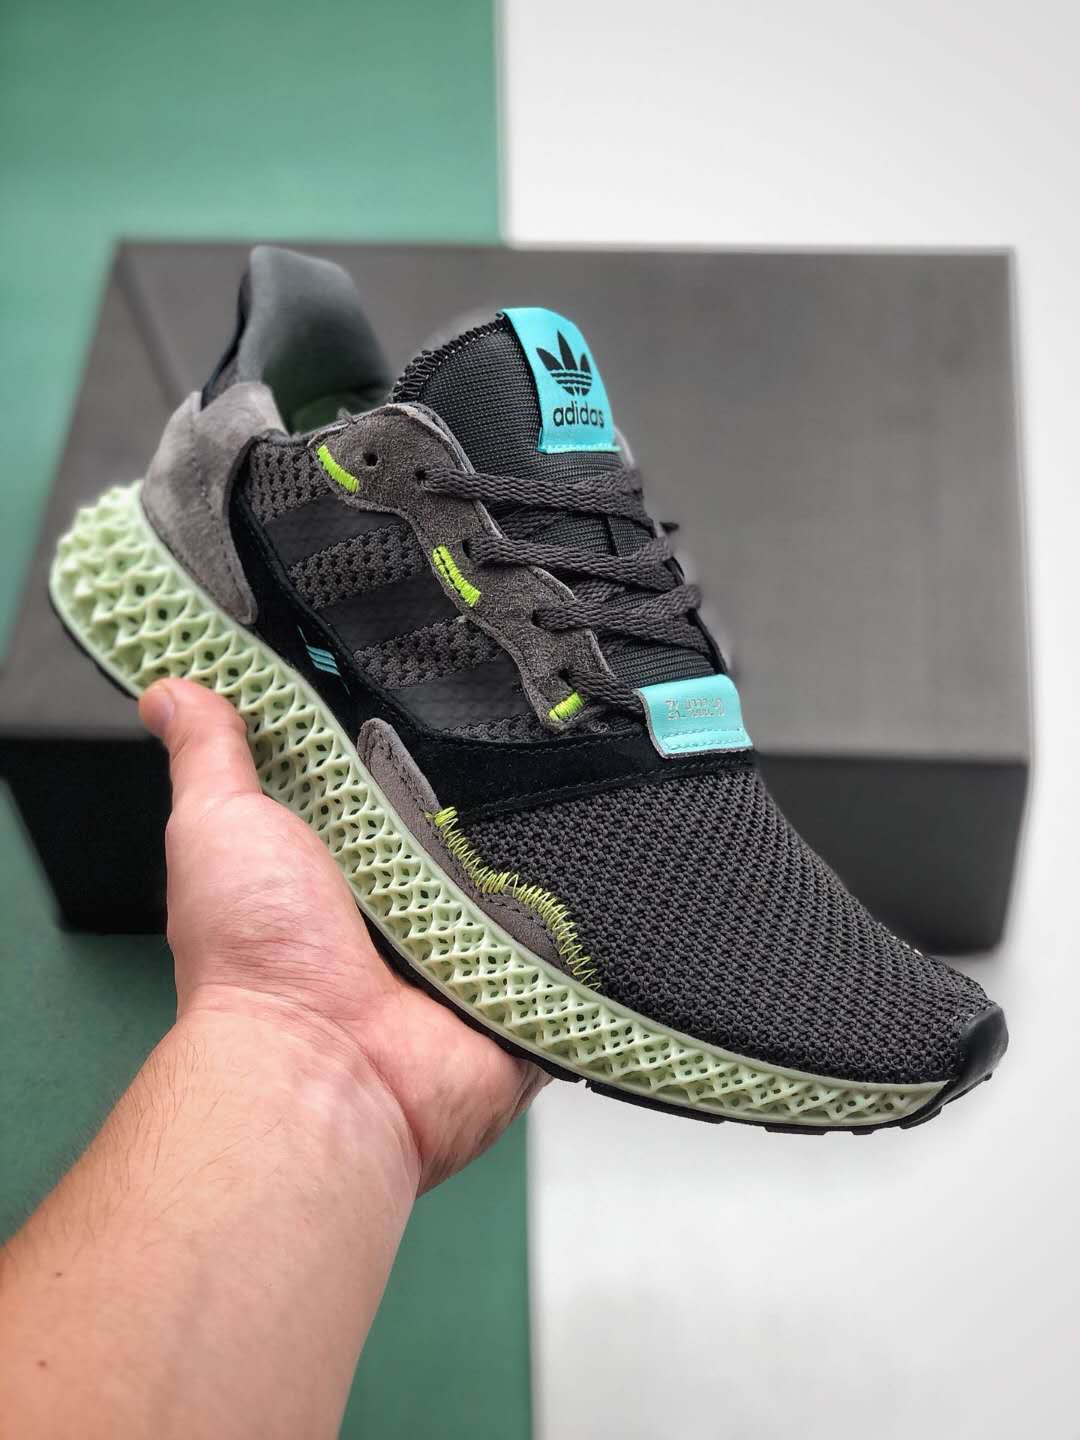 Adidas ZX 4000 Futurecraft 4D Carbon - Innovative Design and Unmatched Performance!